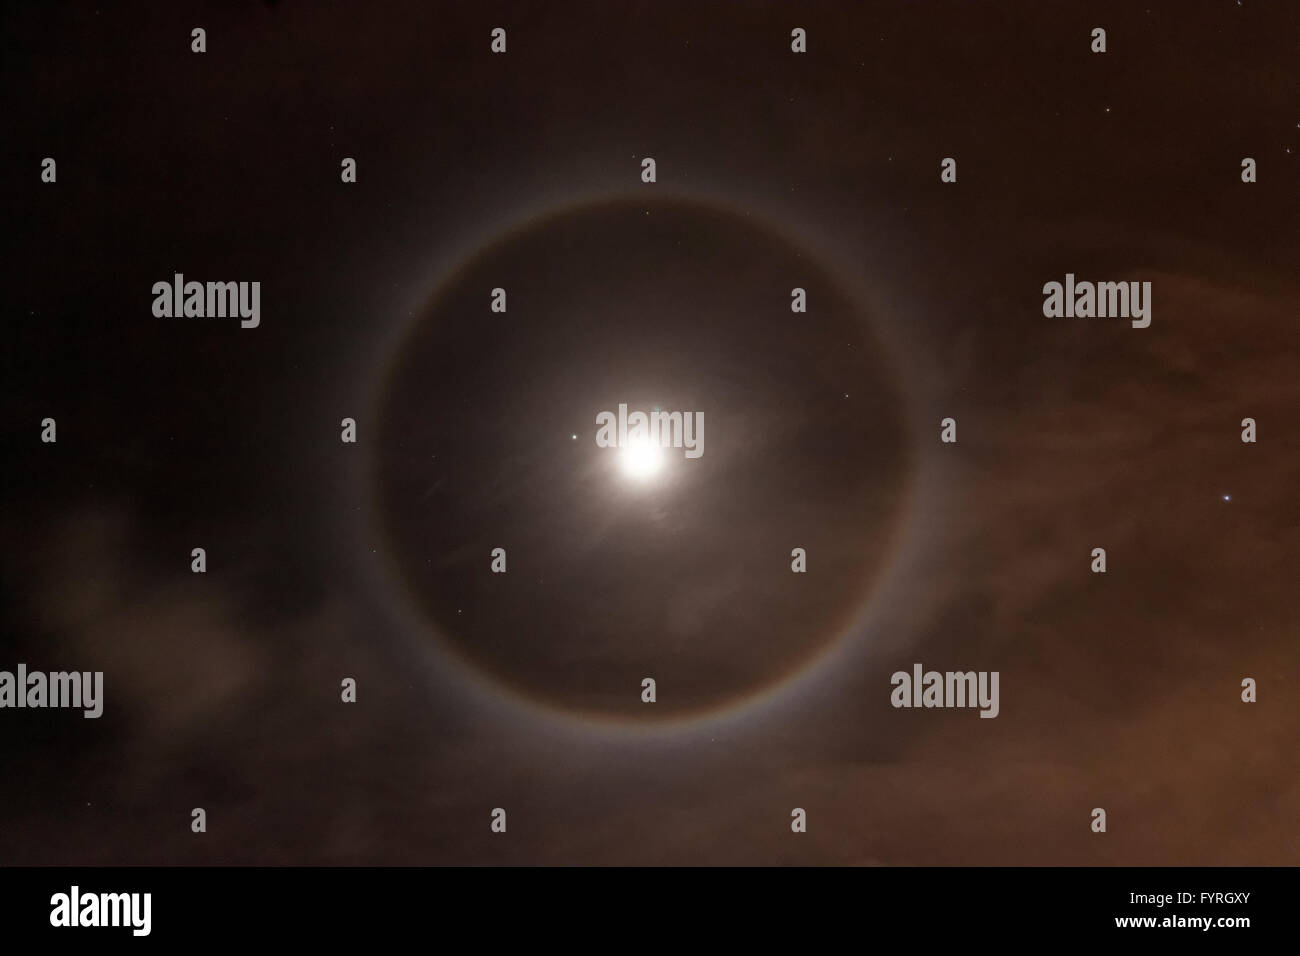 '22 Degree Halo' Ice crystals refracting light forming a circle around the moon (or sun). Stock Photo